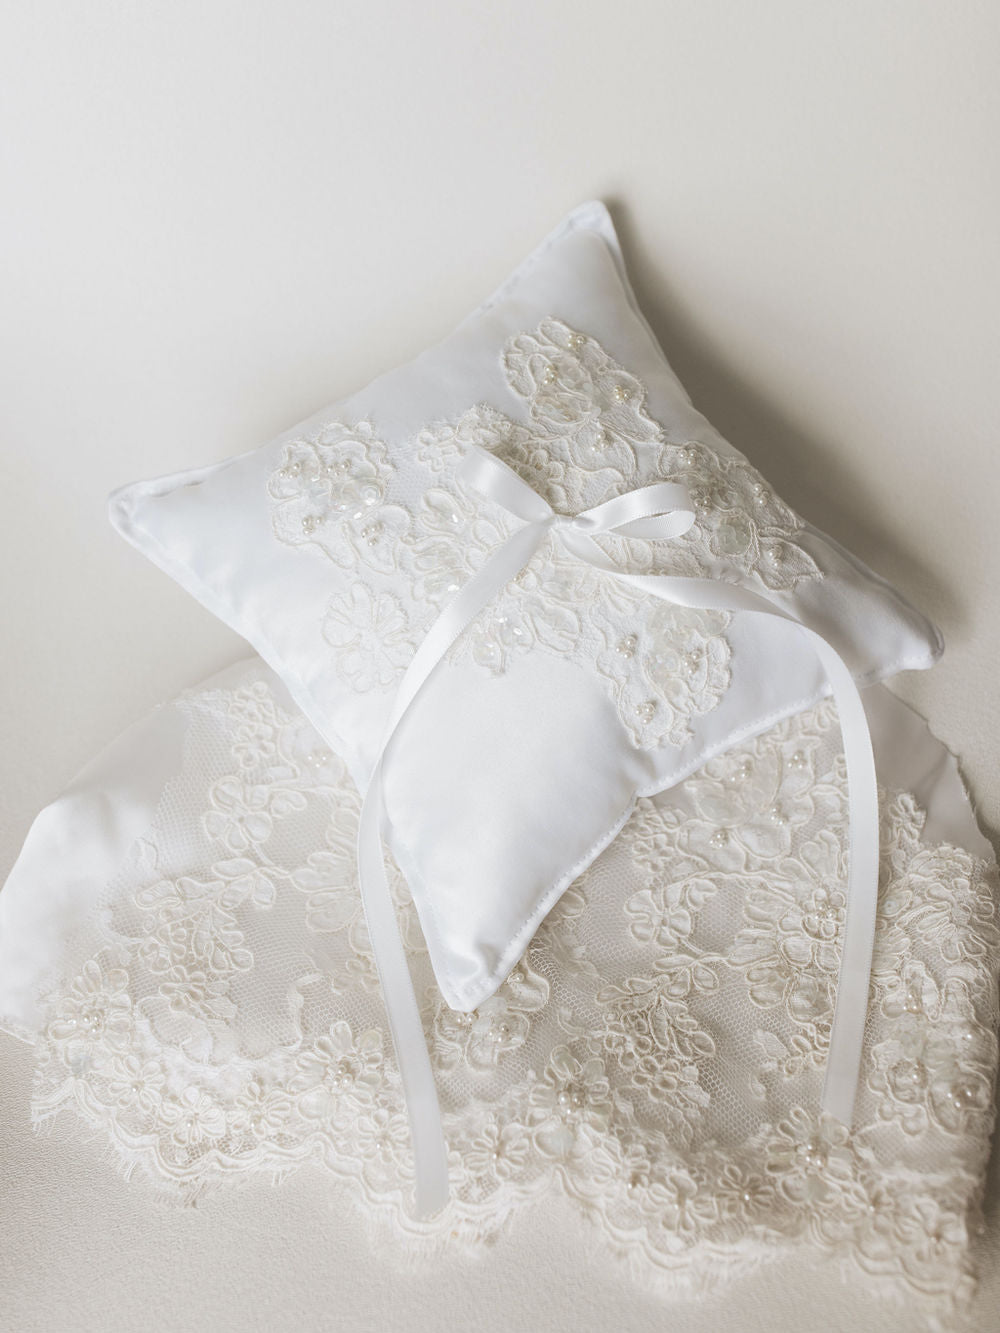 a wedding ring bearer pillow handmade with lace and pearls from the bride's mother's wedding dress by expert heirloom designer, The Garter Girl